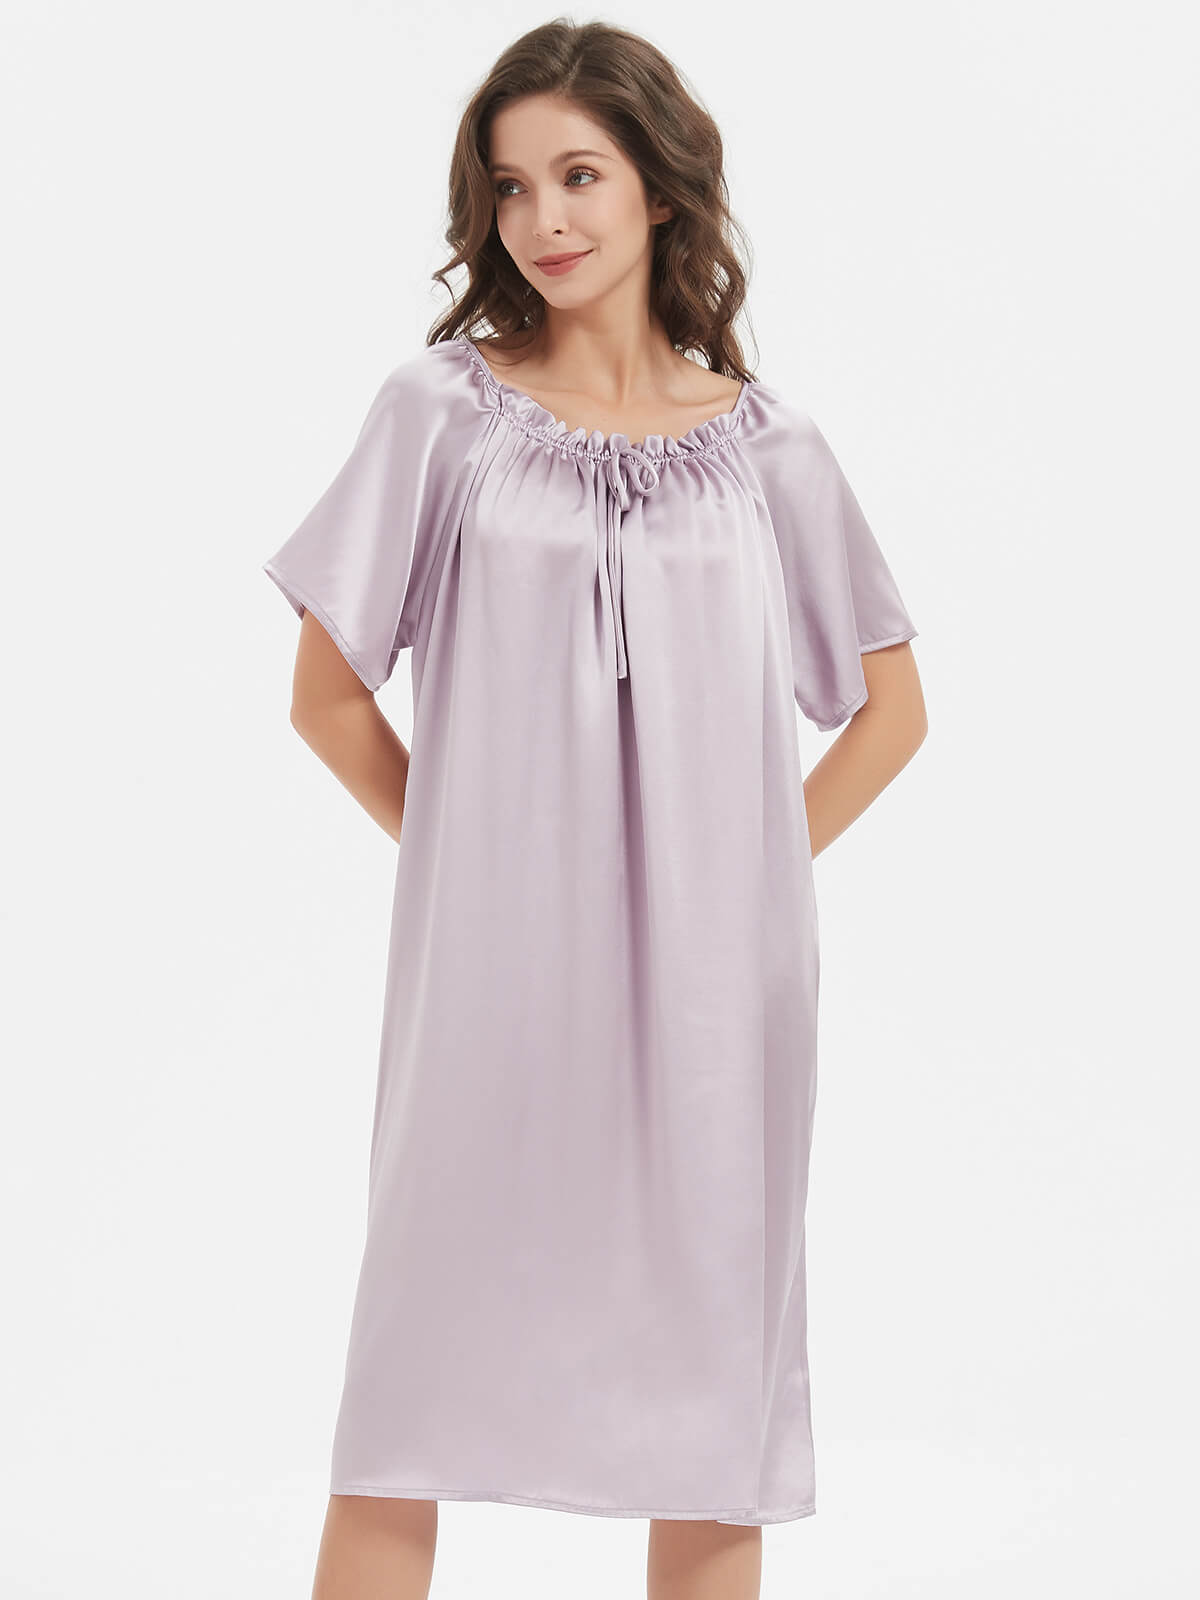 22 Momme Long & Close Fitting Silk Nightgown